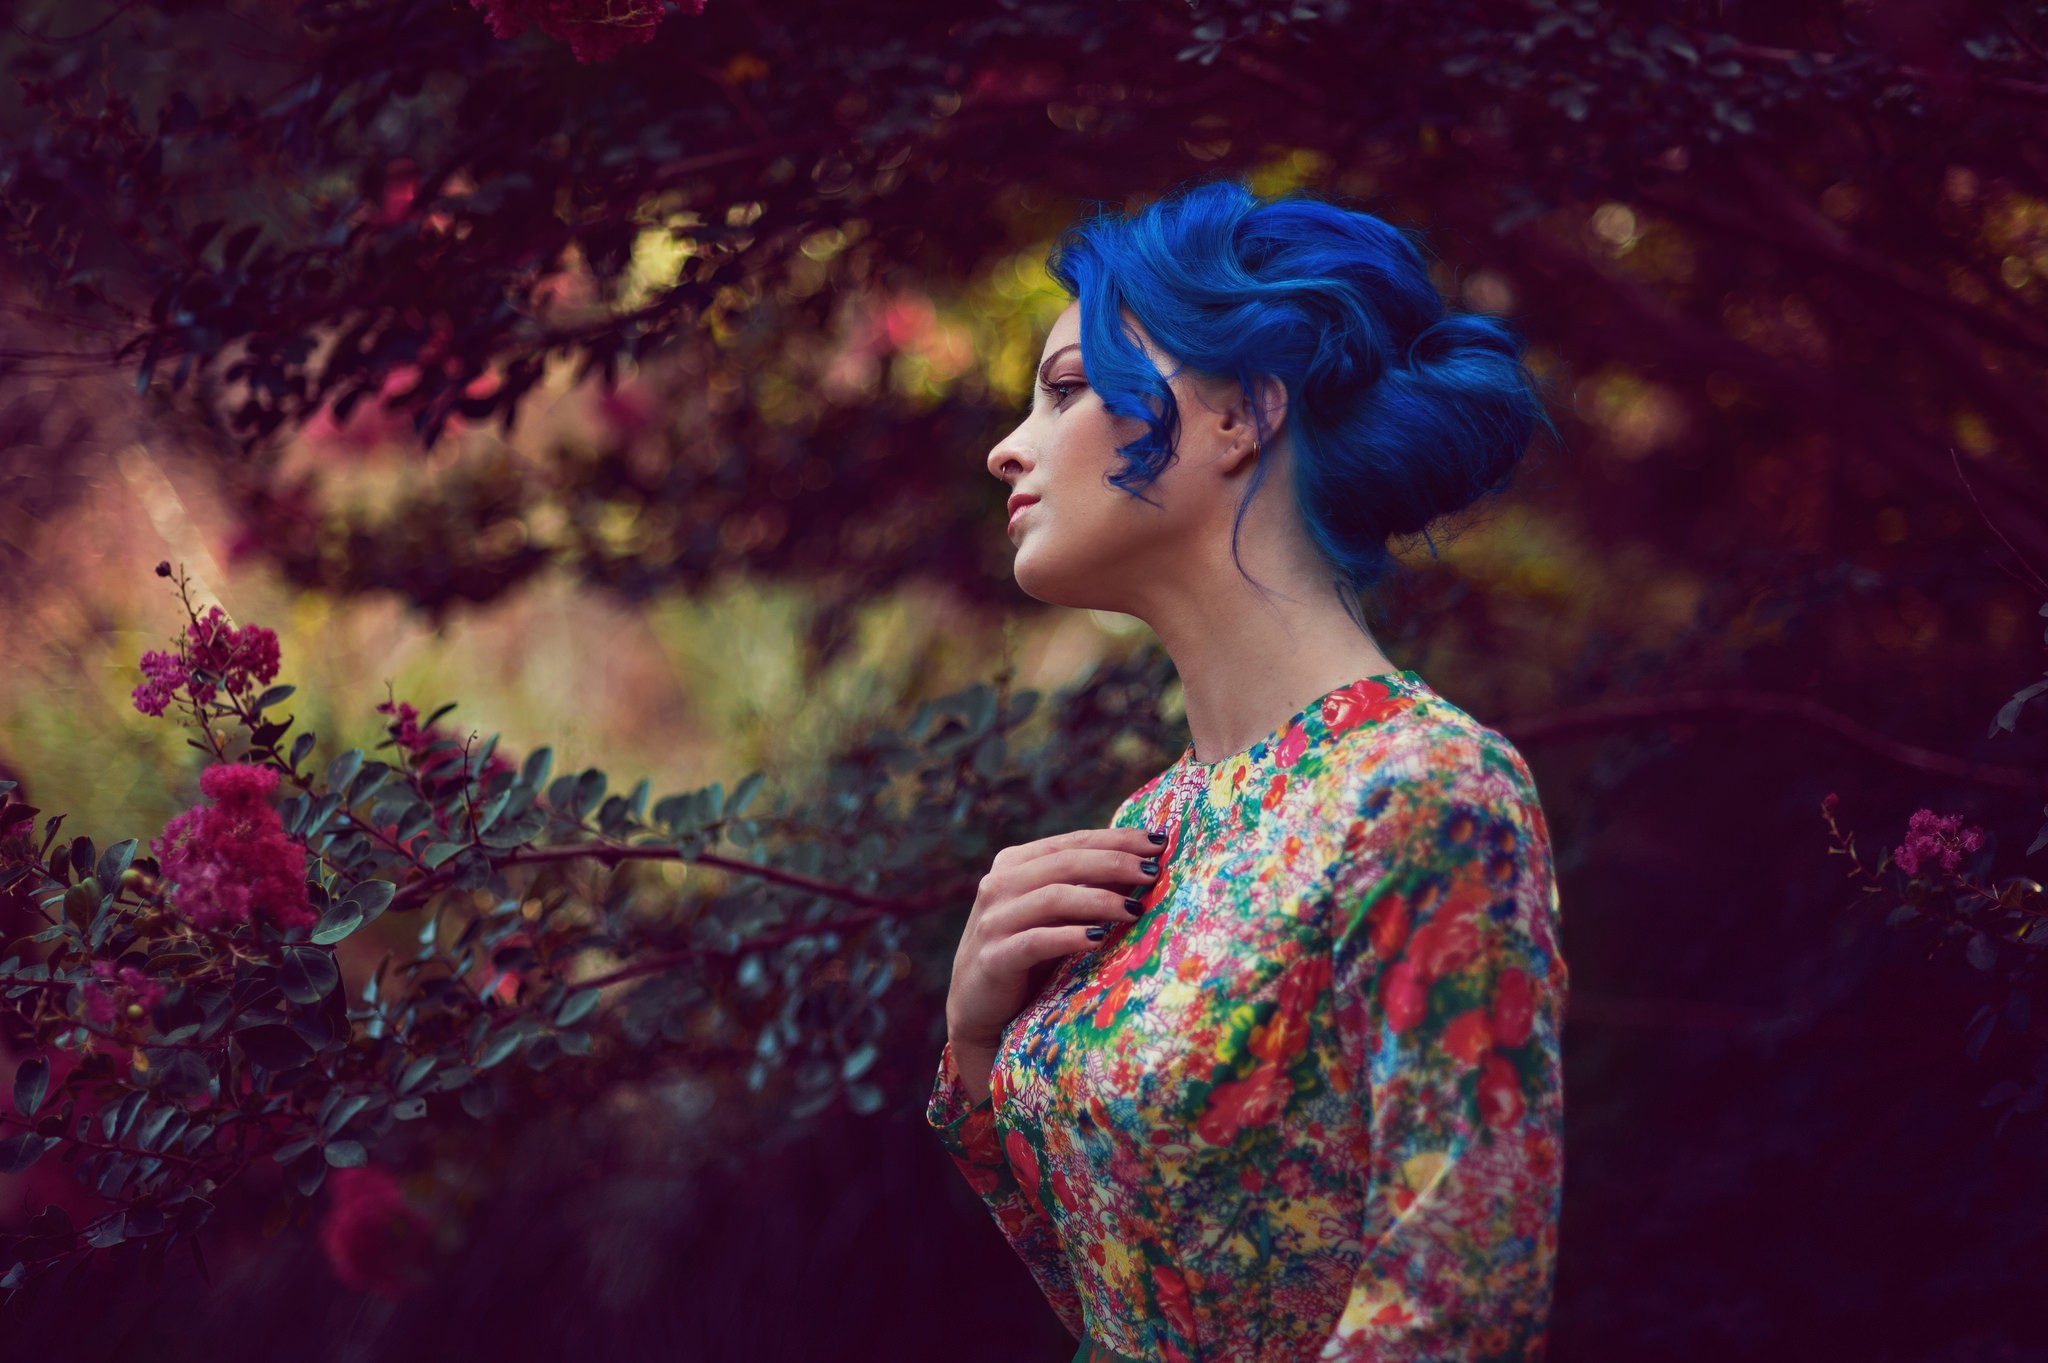 People 2048x1363 women model looking away portrait women outdoors blue hair leaves trees flowers dress plants dyed hair face profile flower dress black nails painted nails